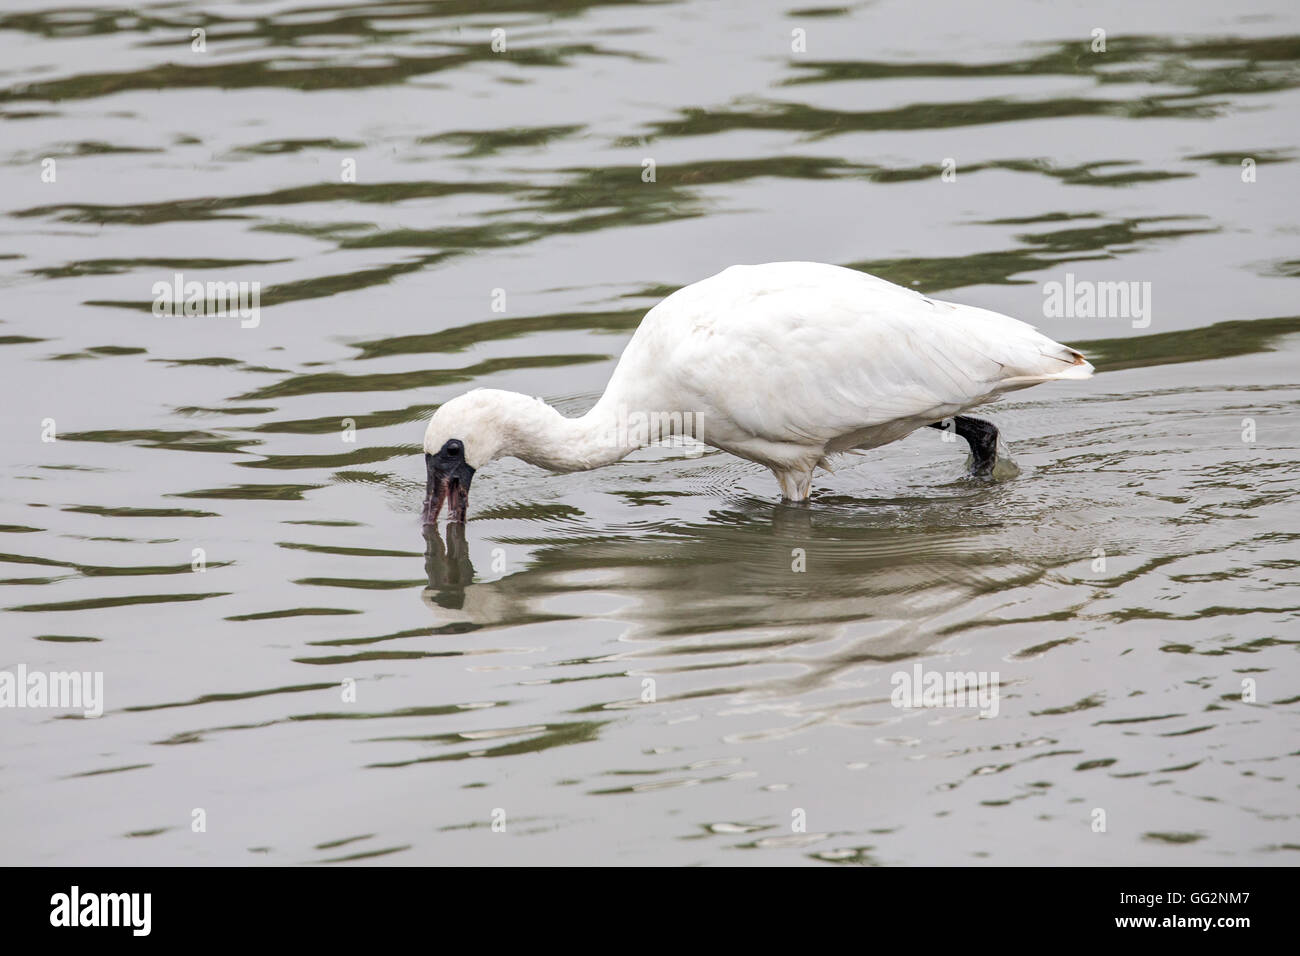 Black-faced Spoonbill looking for food in water Stock Photo